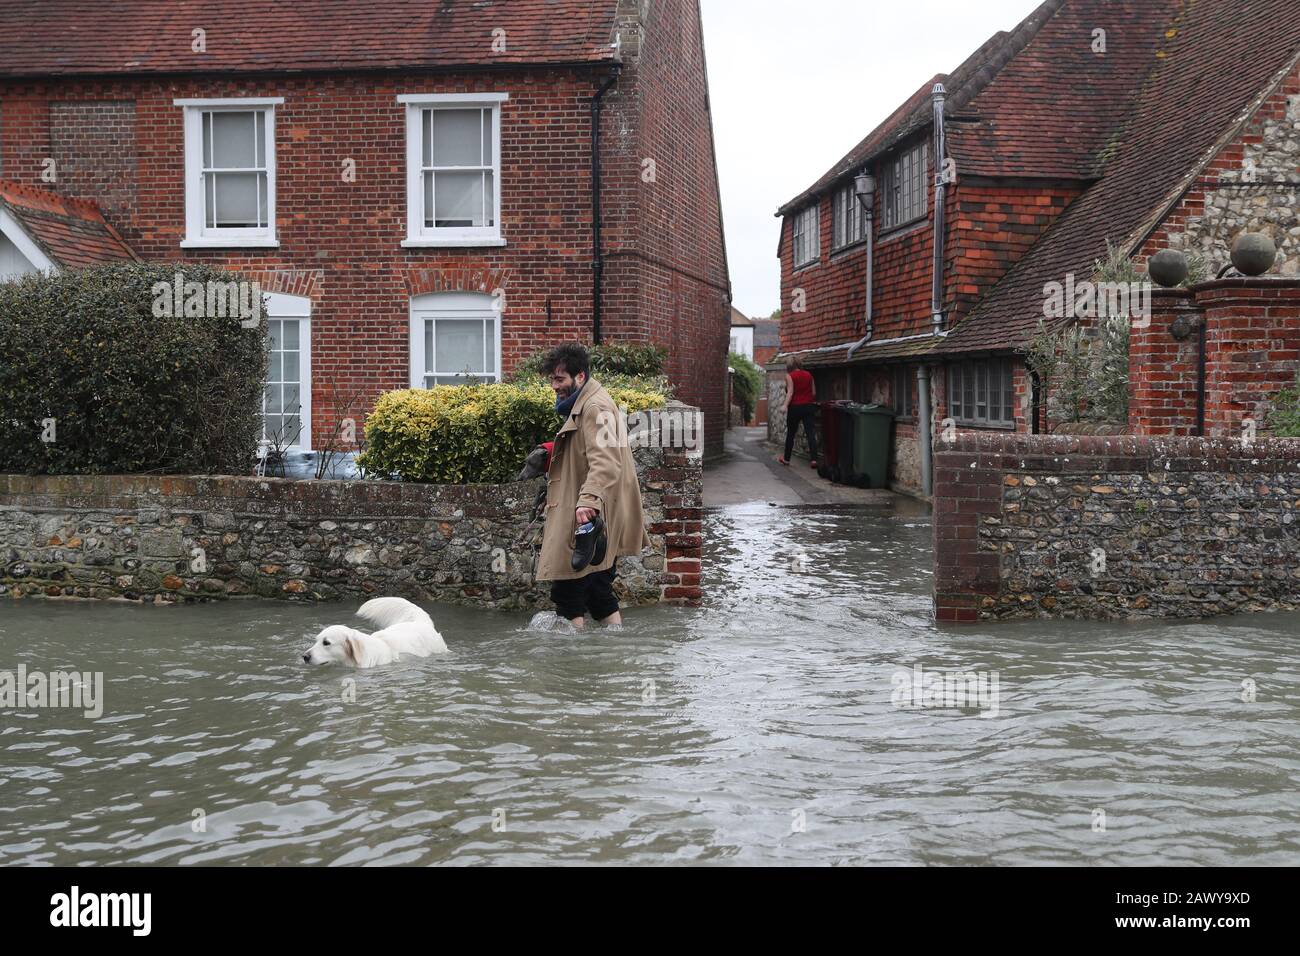 Flooding in Bosham, Sussex caused by the high tide, the Met Office have said that 'a spell of very strong winds,' with gusts of 60-70mph, is expected across southern England on Monday, bringing likely delays to road, rail, air and ferry transport. Stock Photo